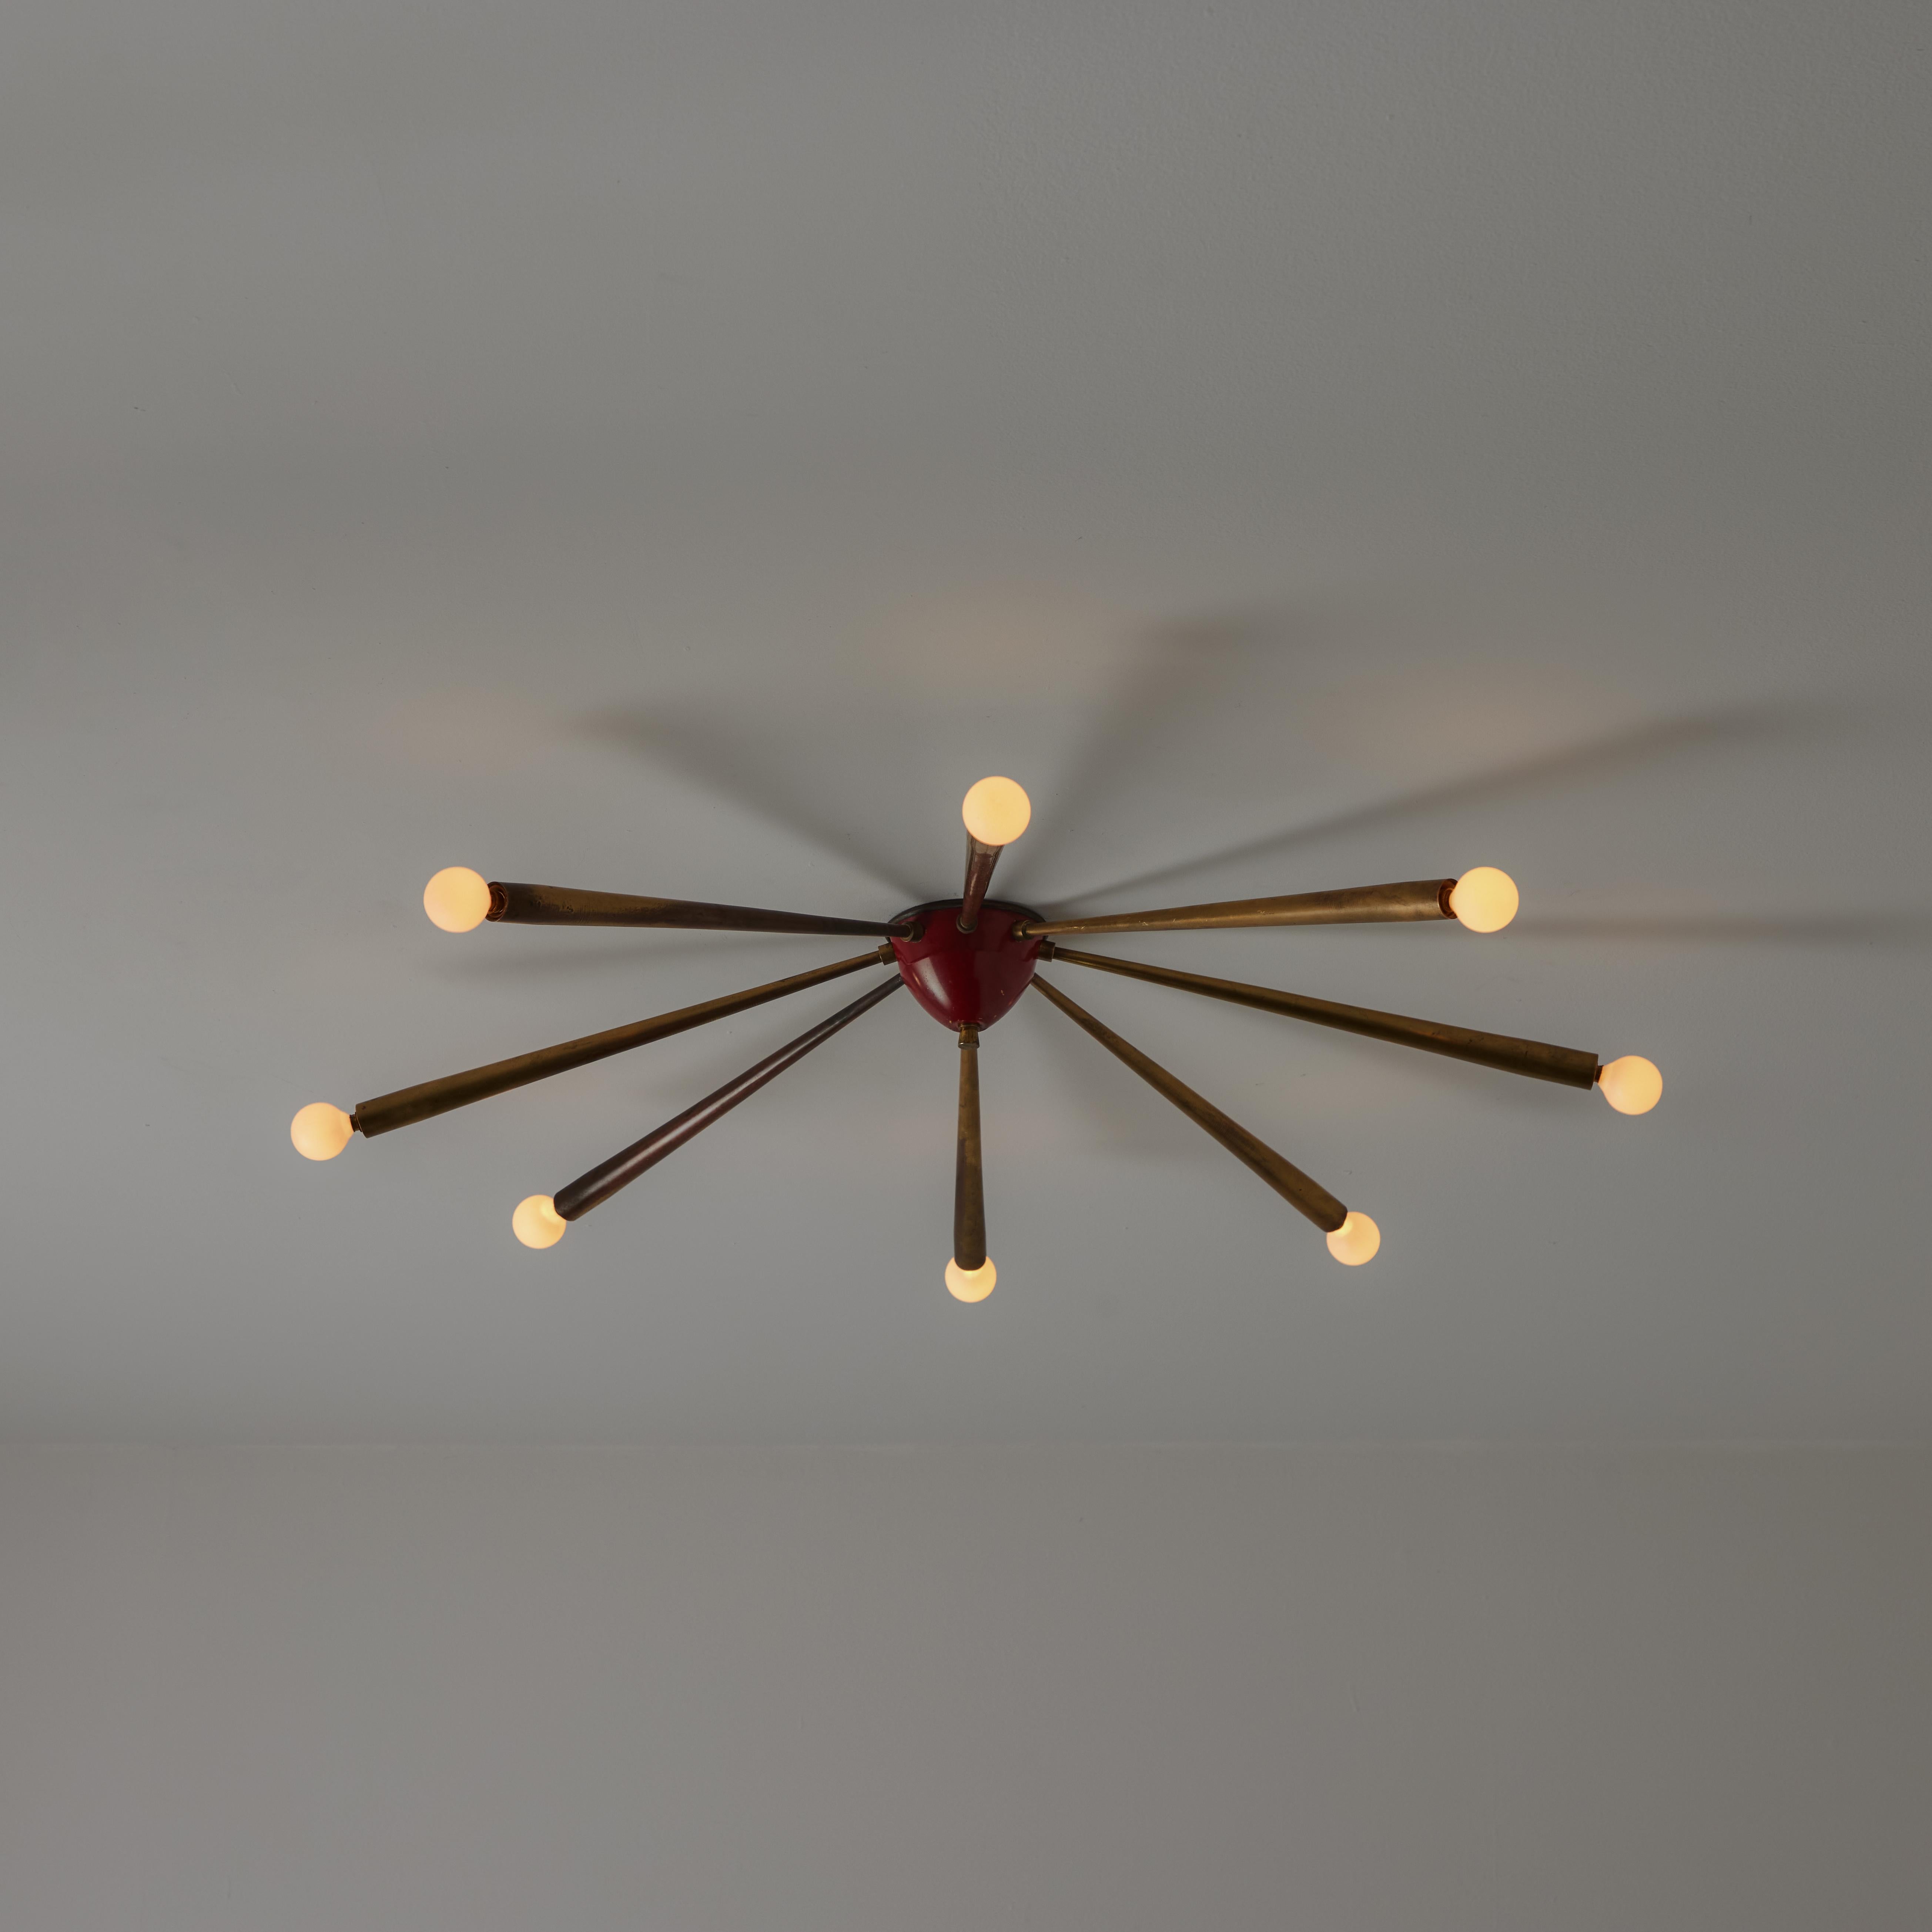 Ceiling or Wall Light Attributed to Oscar Torlasco. Designed and manufactured in Italy circa the 1950s. A total of eight tapered brass armatures sprayed from a centered nucleus. The center cup is finished in red. All finishes hold a gorgeous